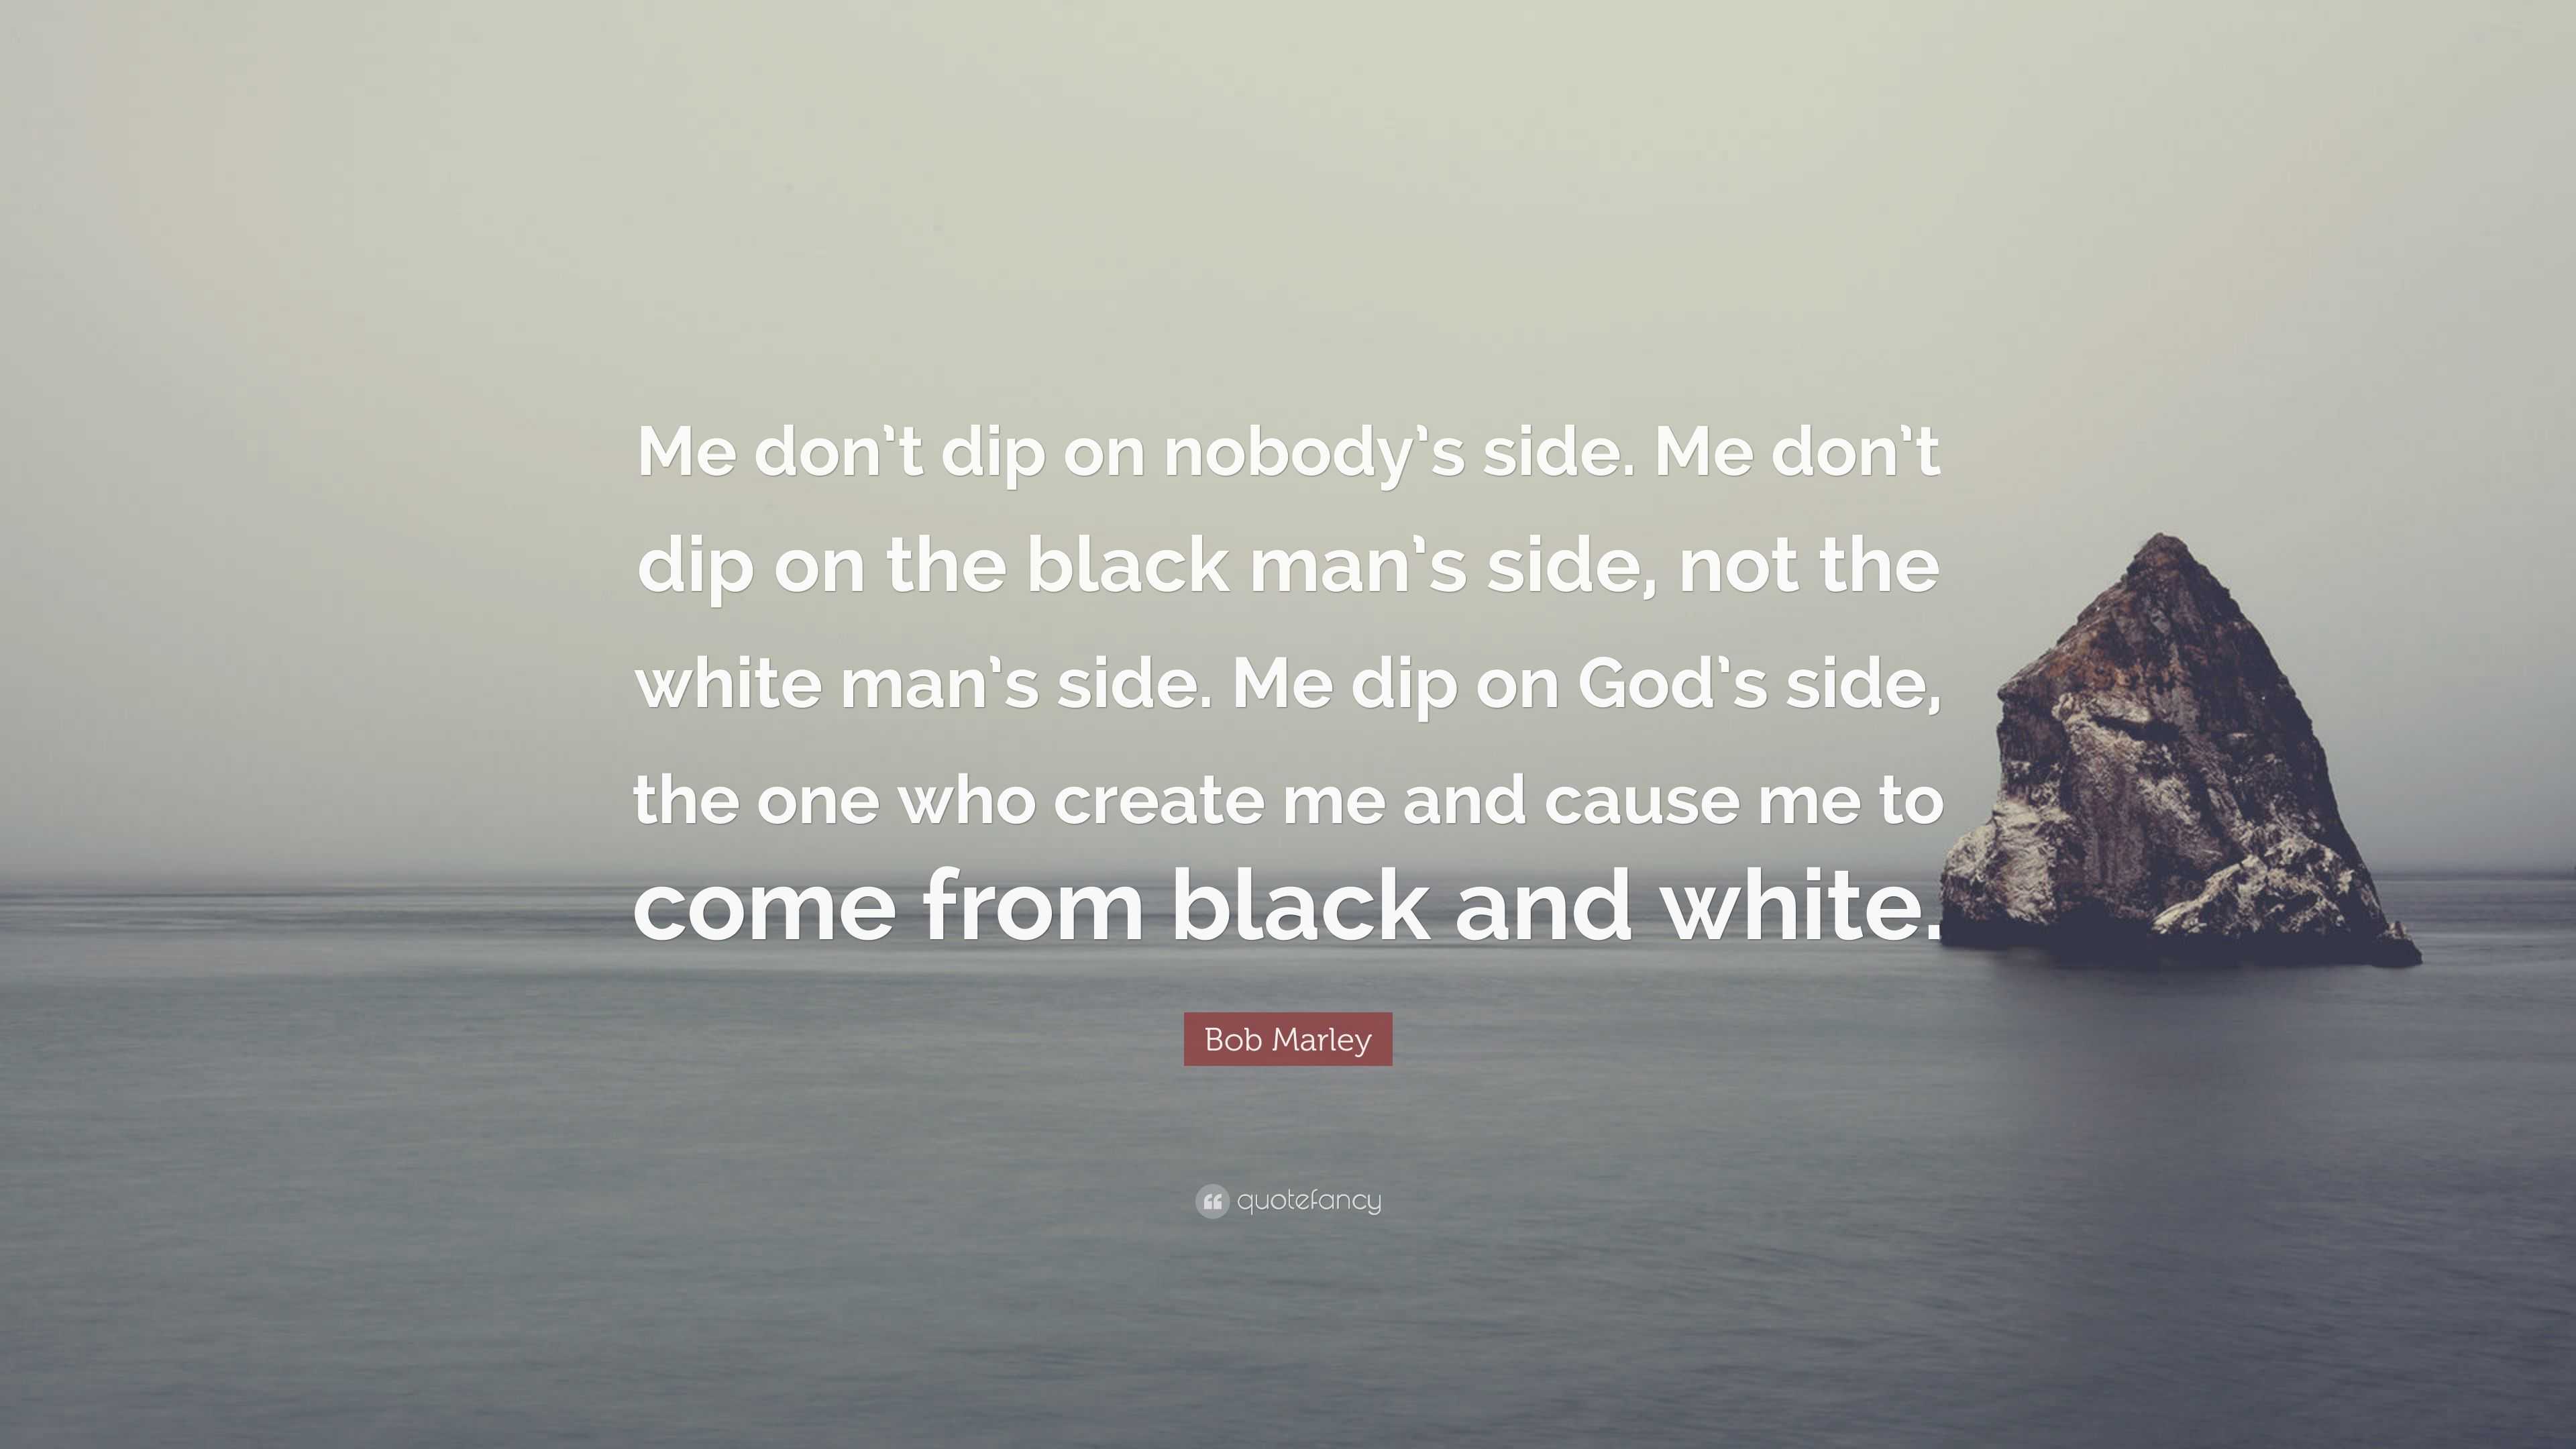 Bob Marley Quote: “Me don't dip on nobody's side. Me don't dip on the black  man's side, not the white man's side. Me dip on God's side, the...”